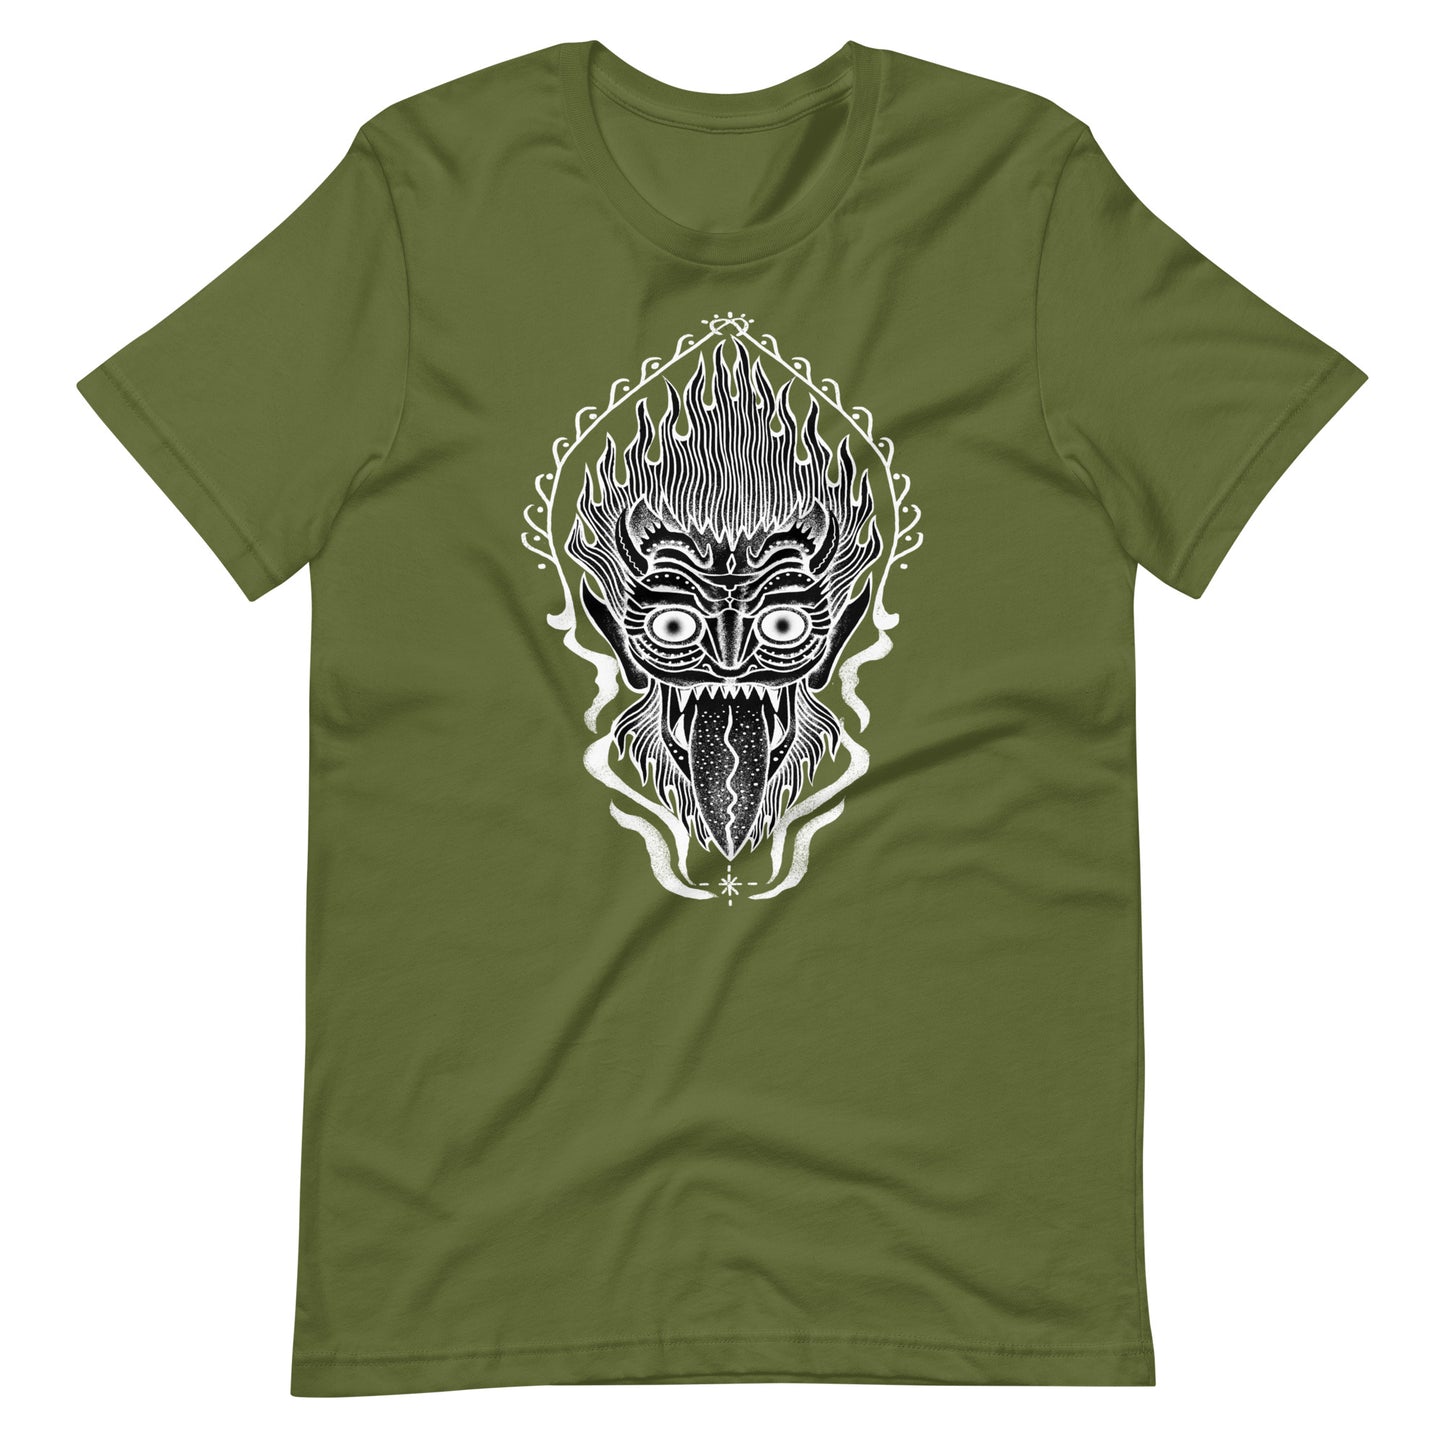 King of Fire - Men's t-shirt - Olive Front